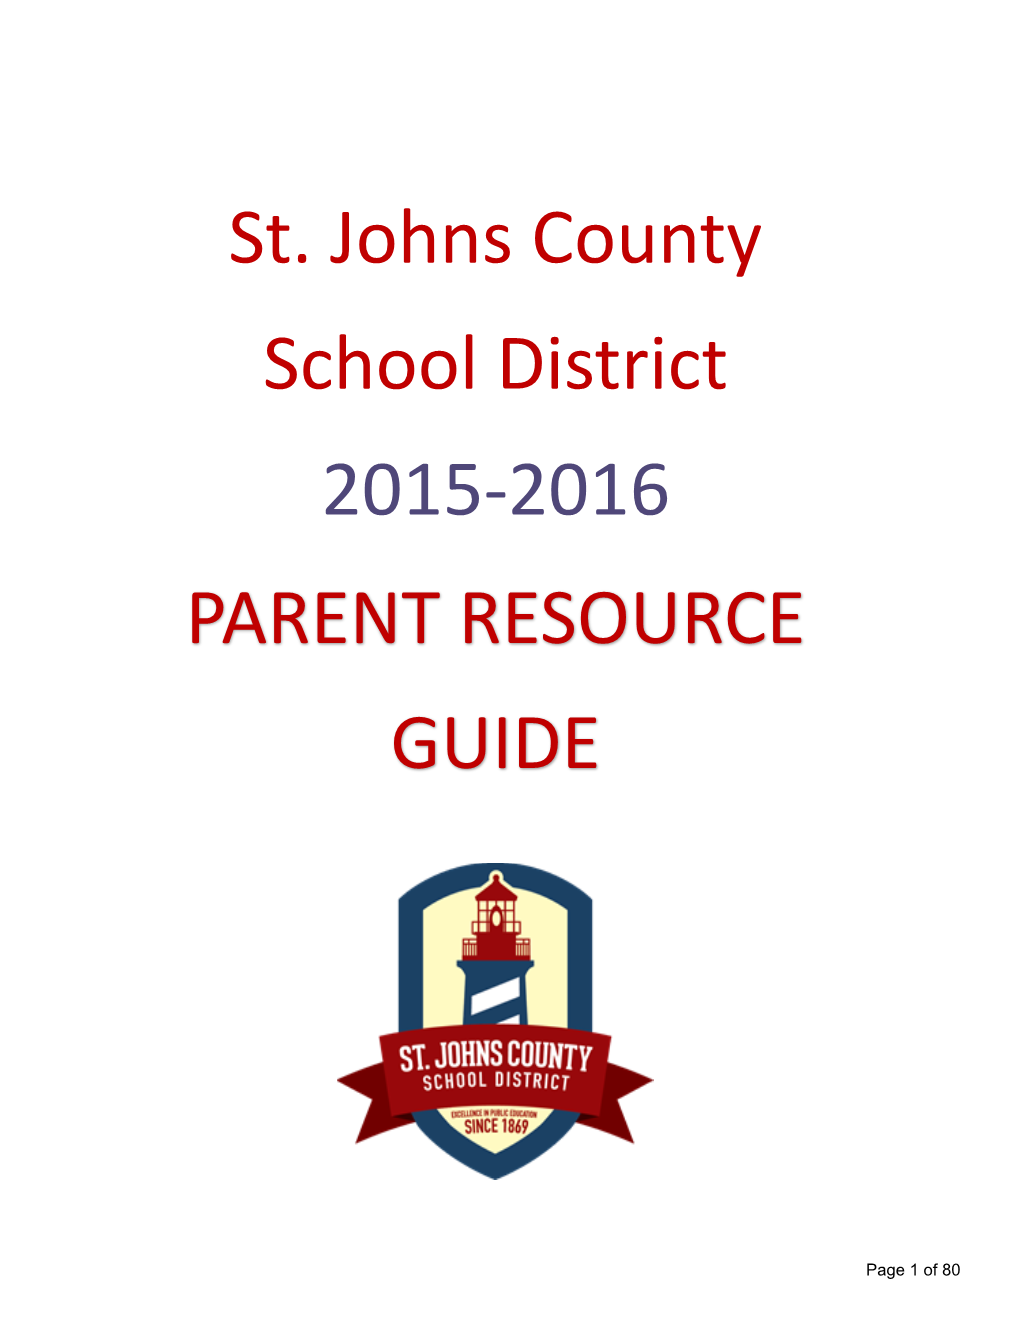 St. Johns County School District 2015-2016 PARENT RESOURCE GUIDE